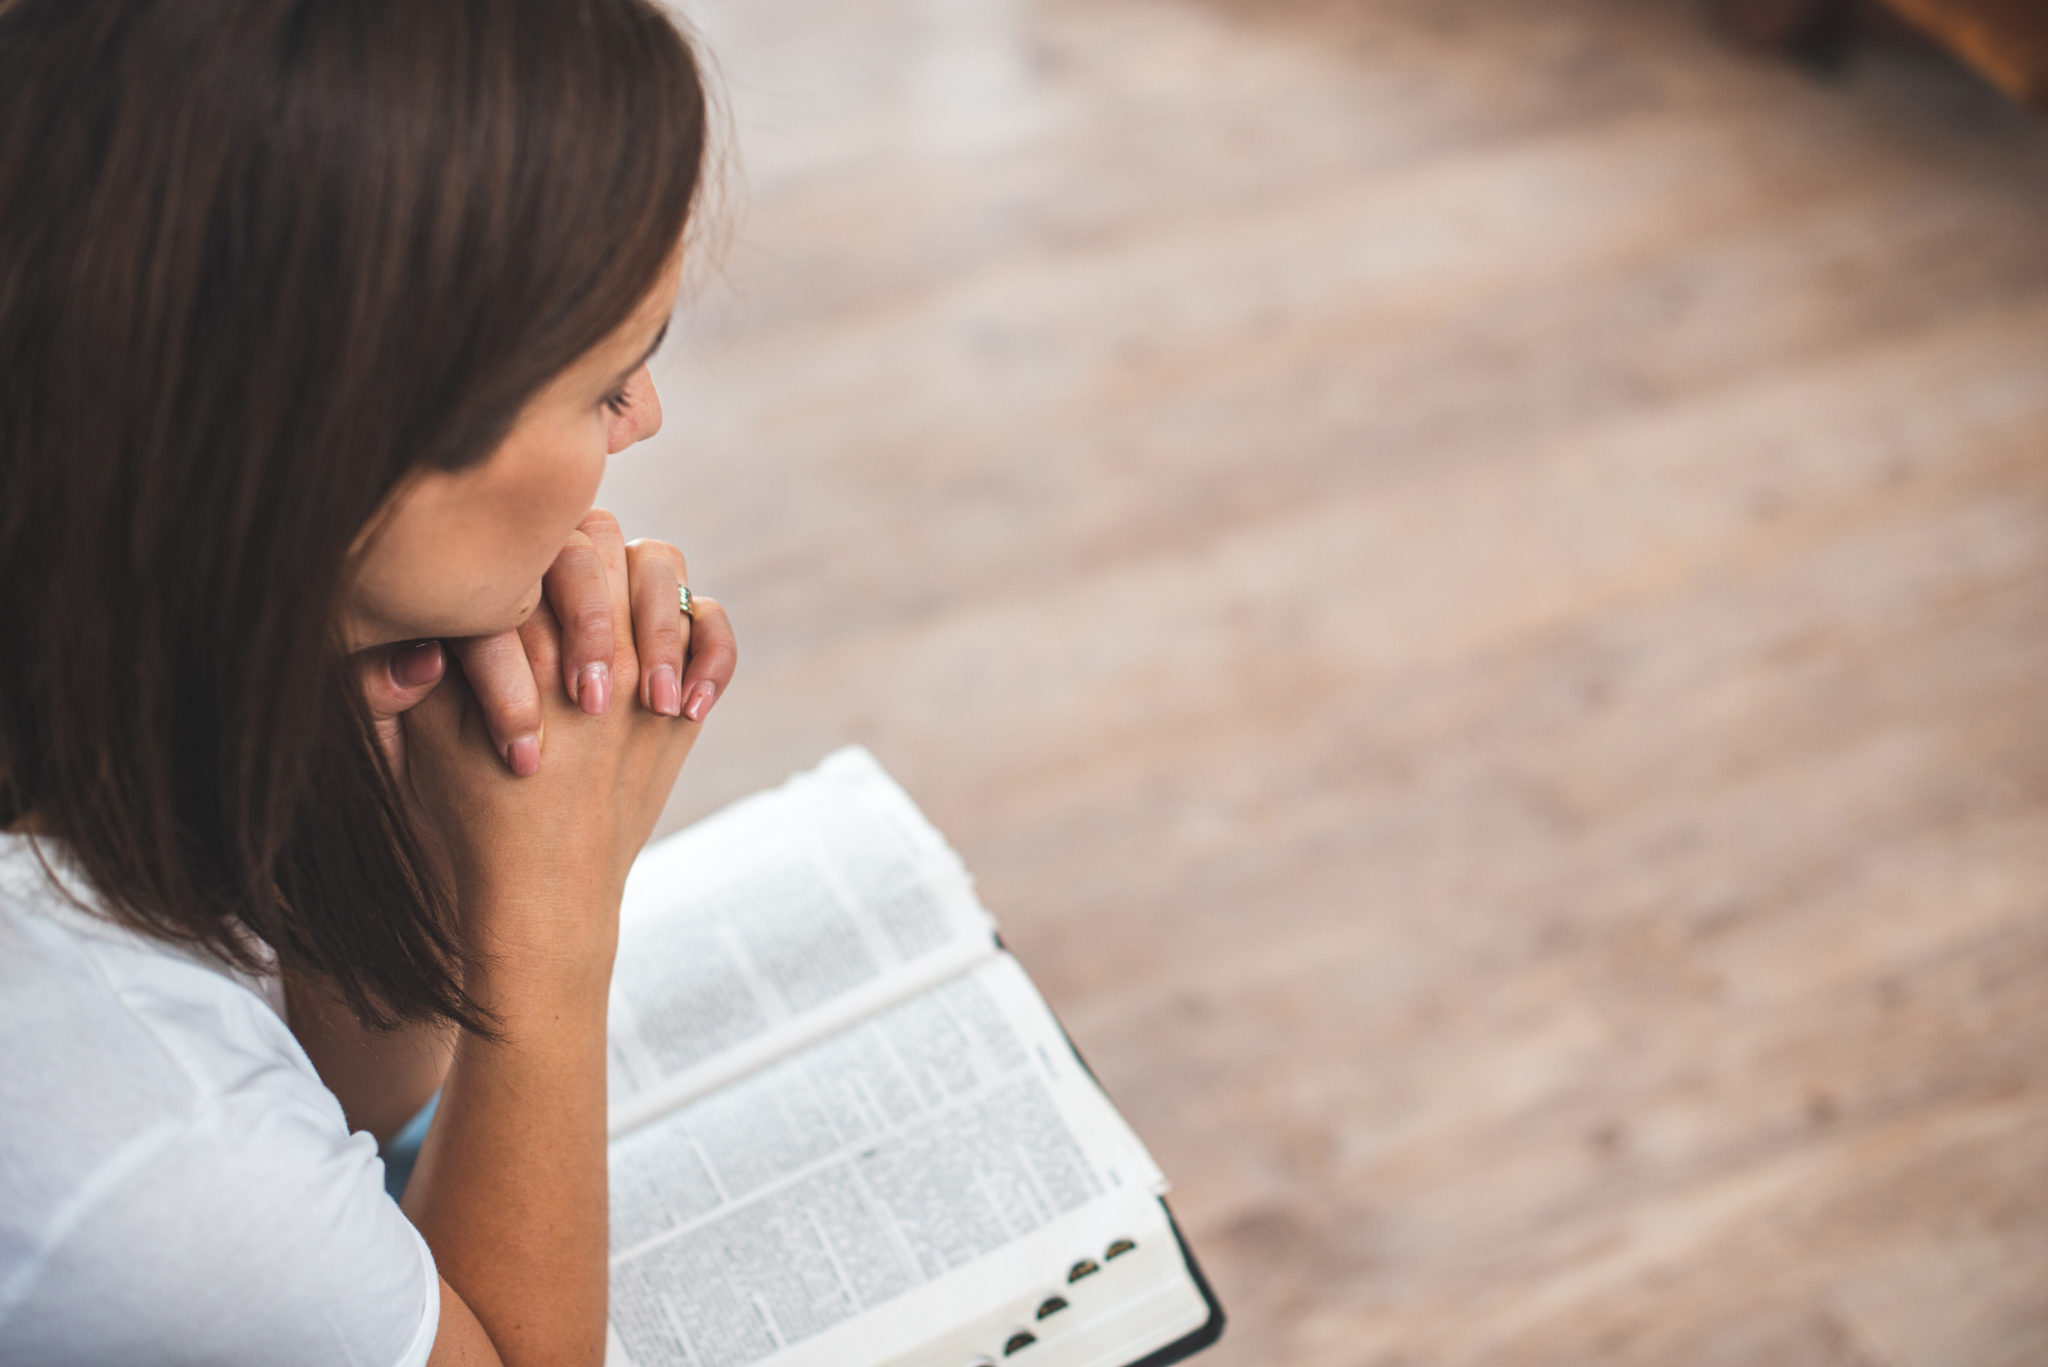 young woman pray with bible relationship with God at home